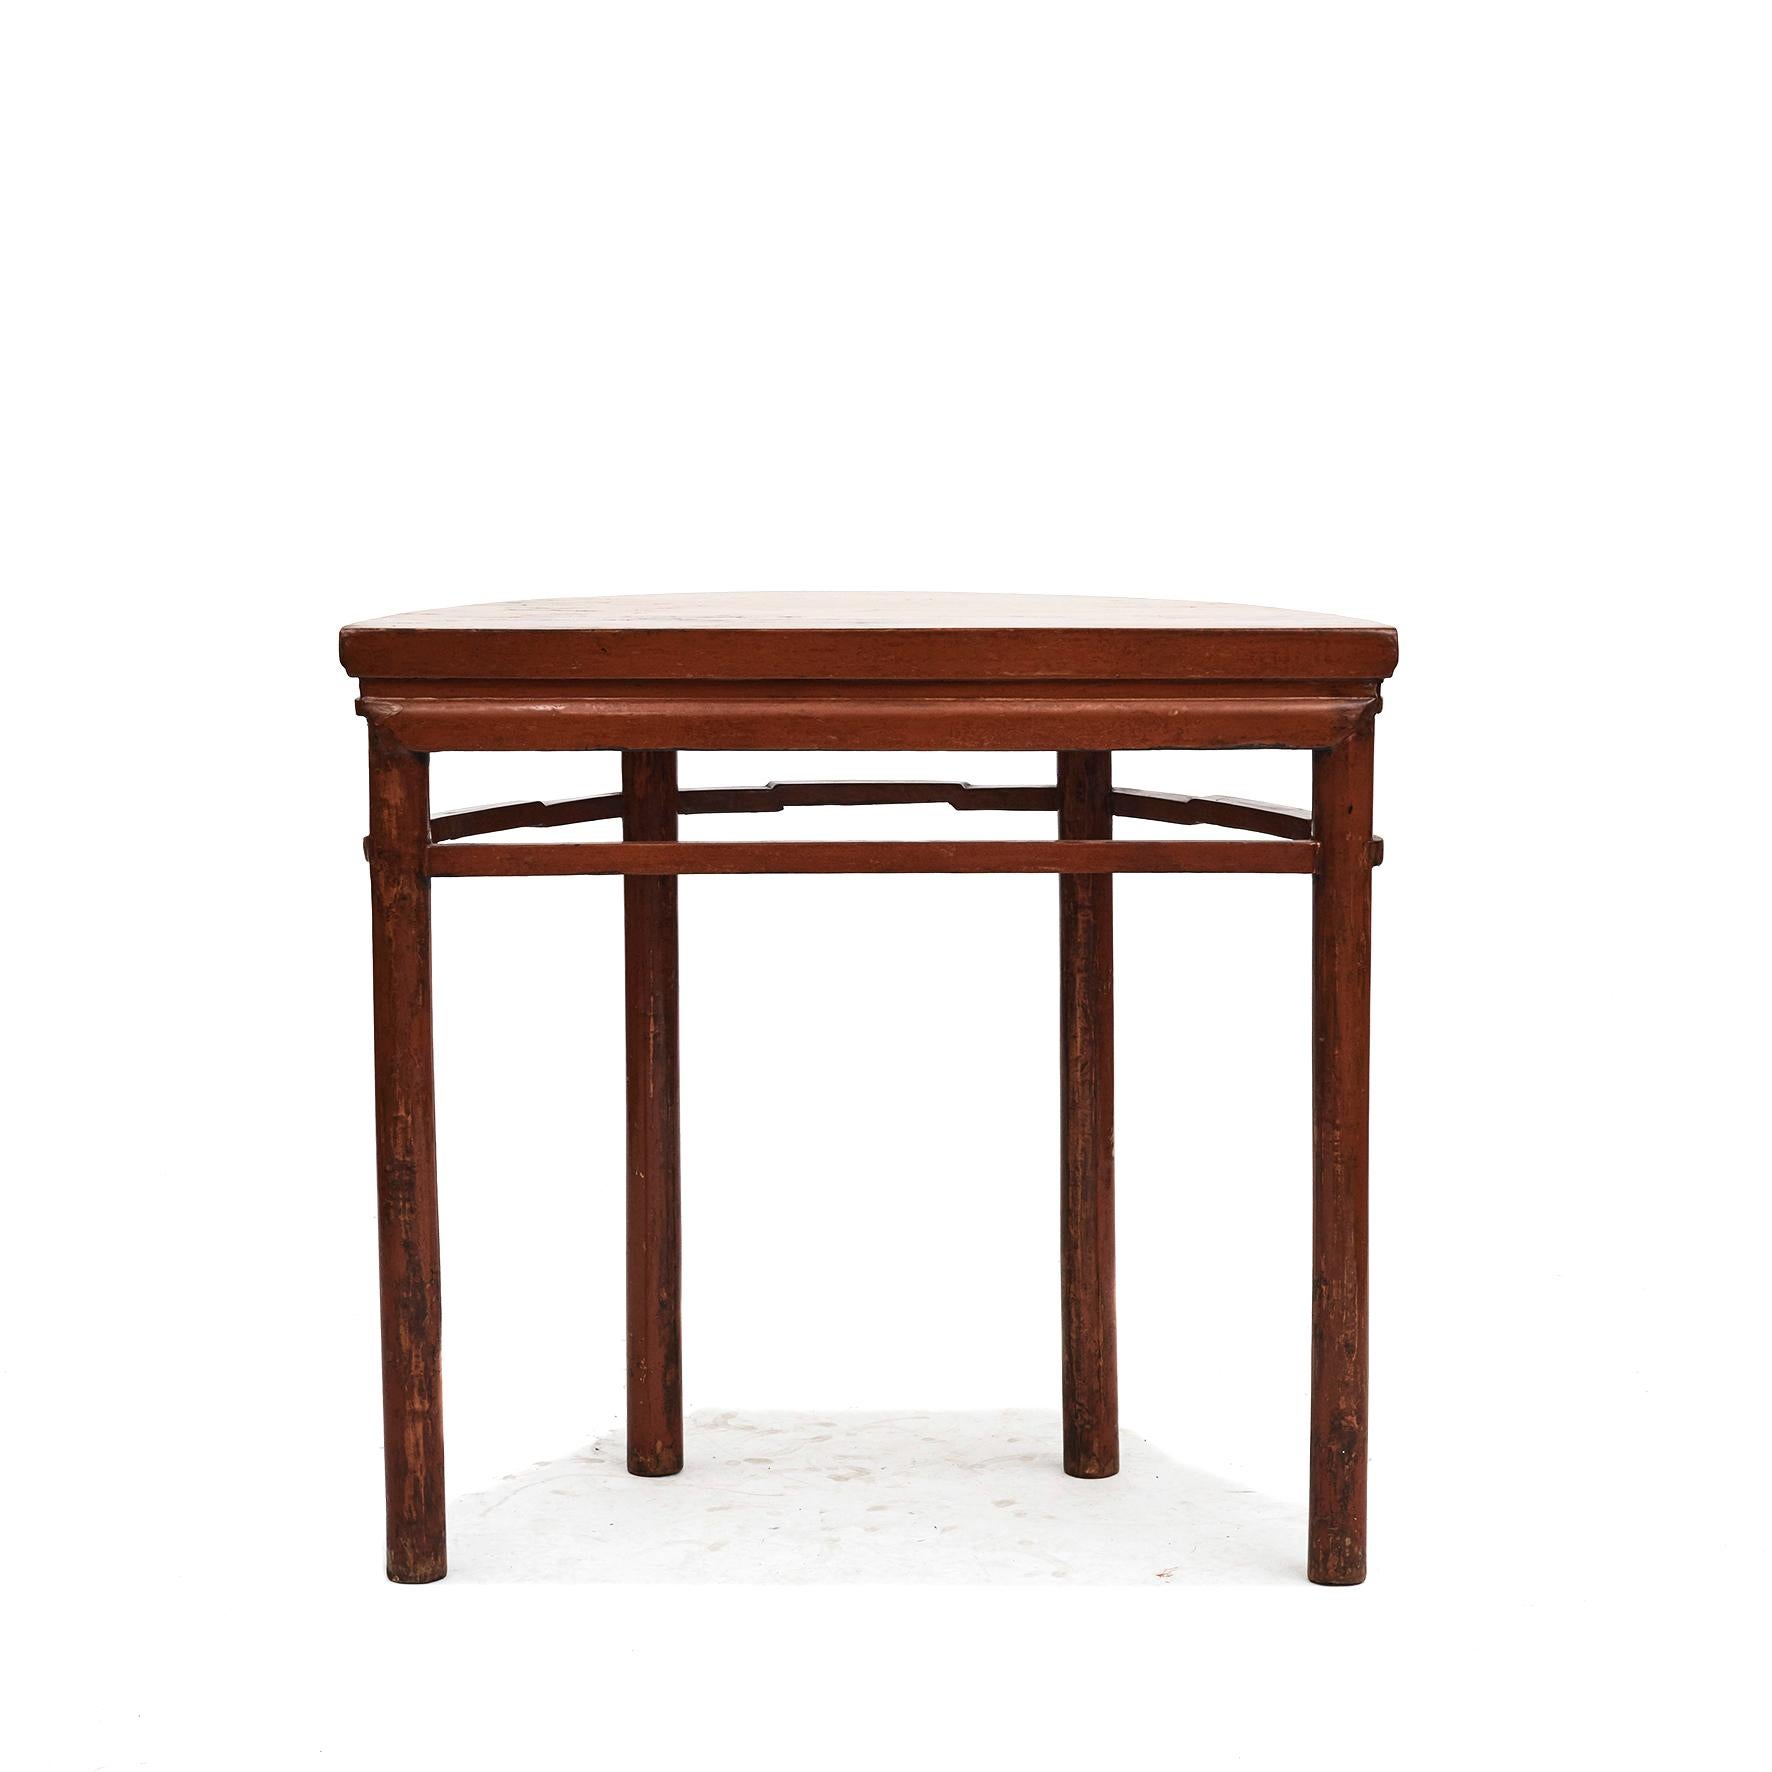 Chinese Demi lune Table In Cognac / Reddish Lacquer  For Sale